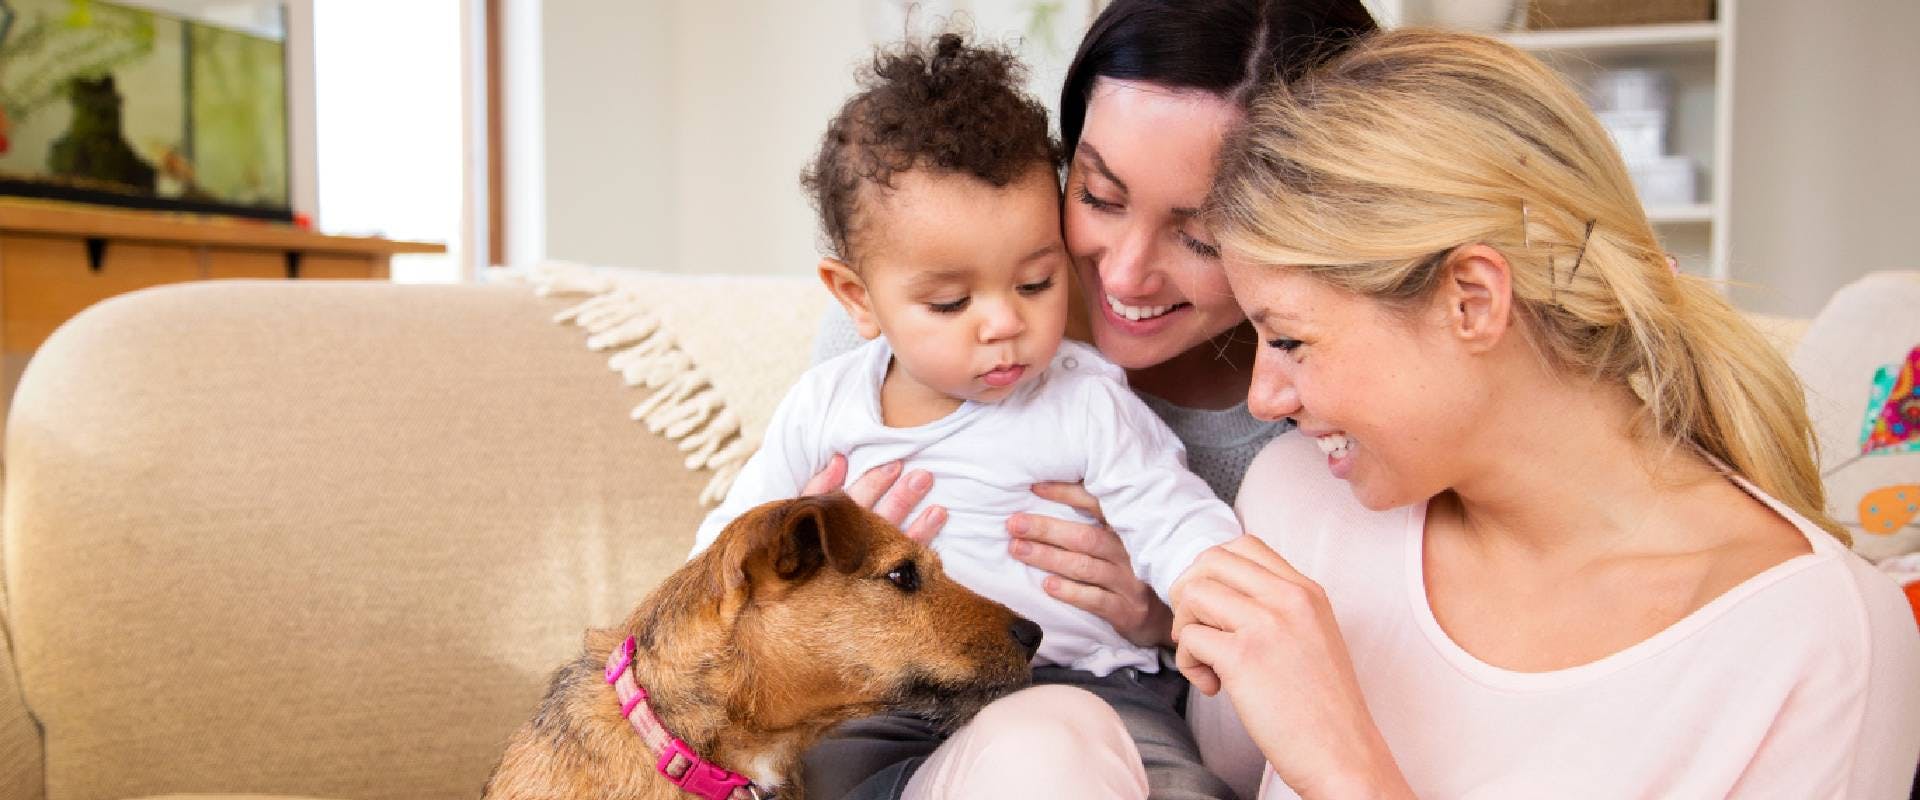 Women with a baby and dog